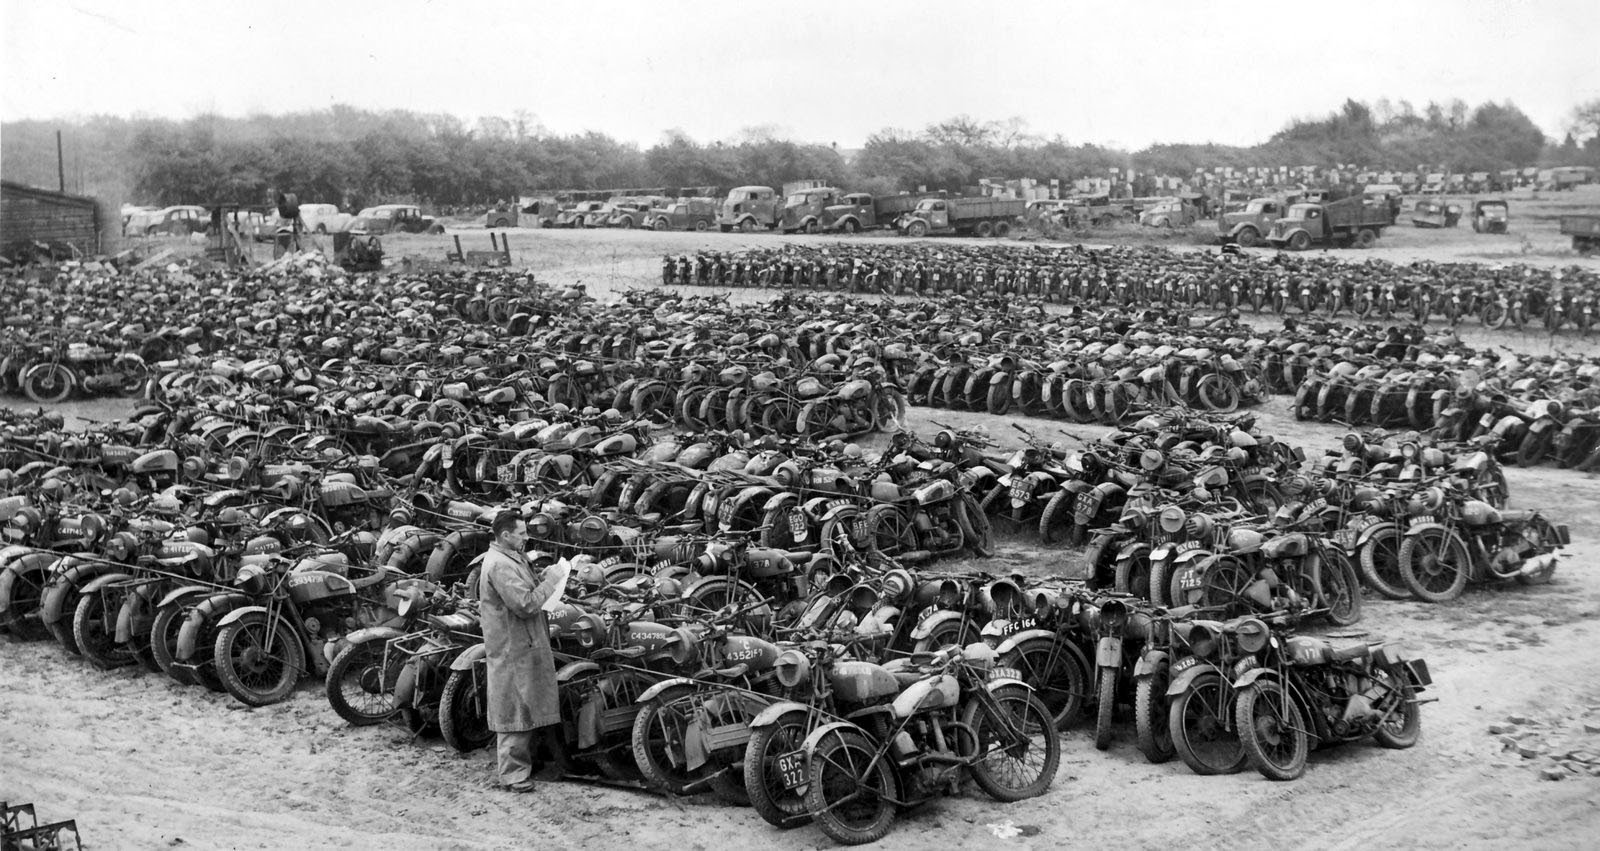 A Brief History of Military Motorcycles